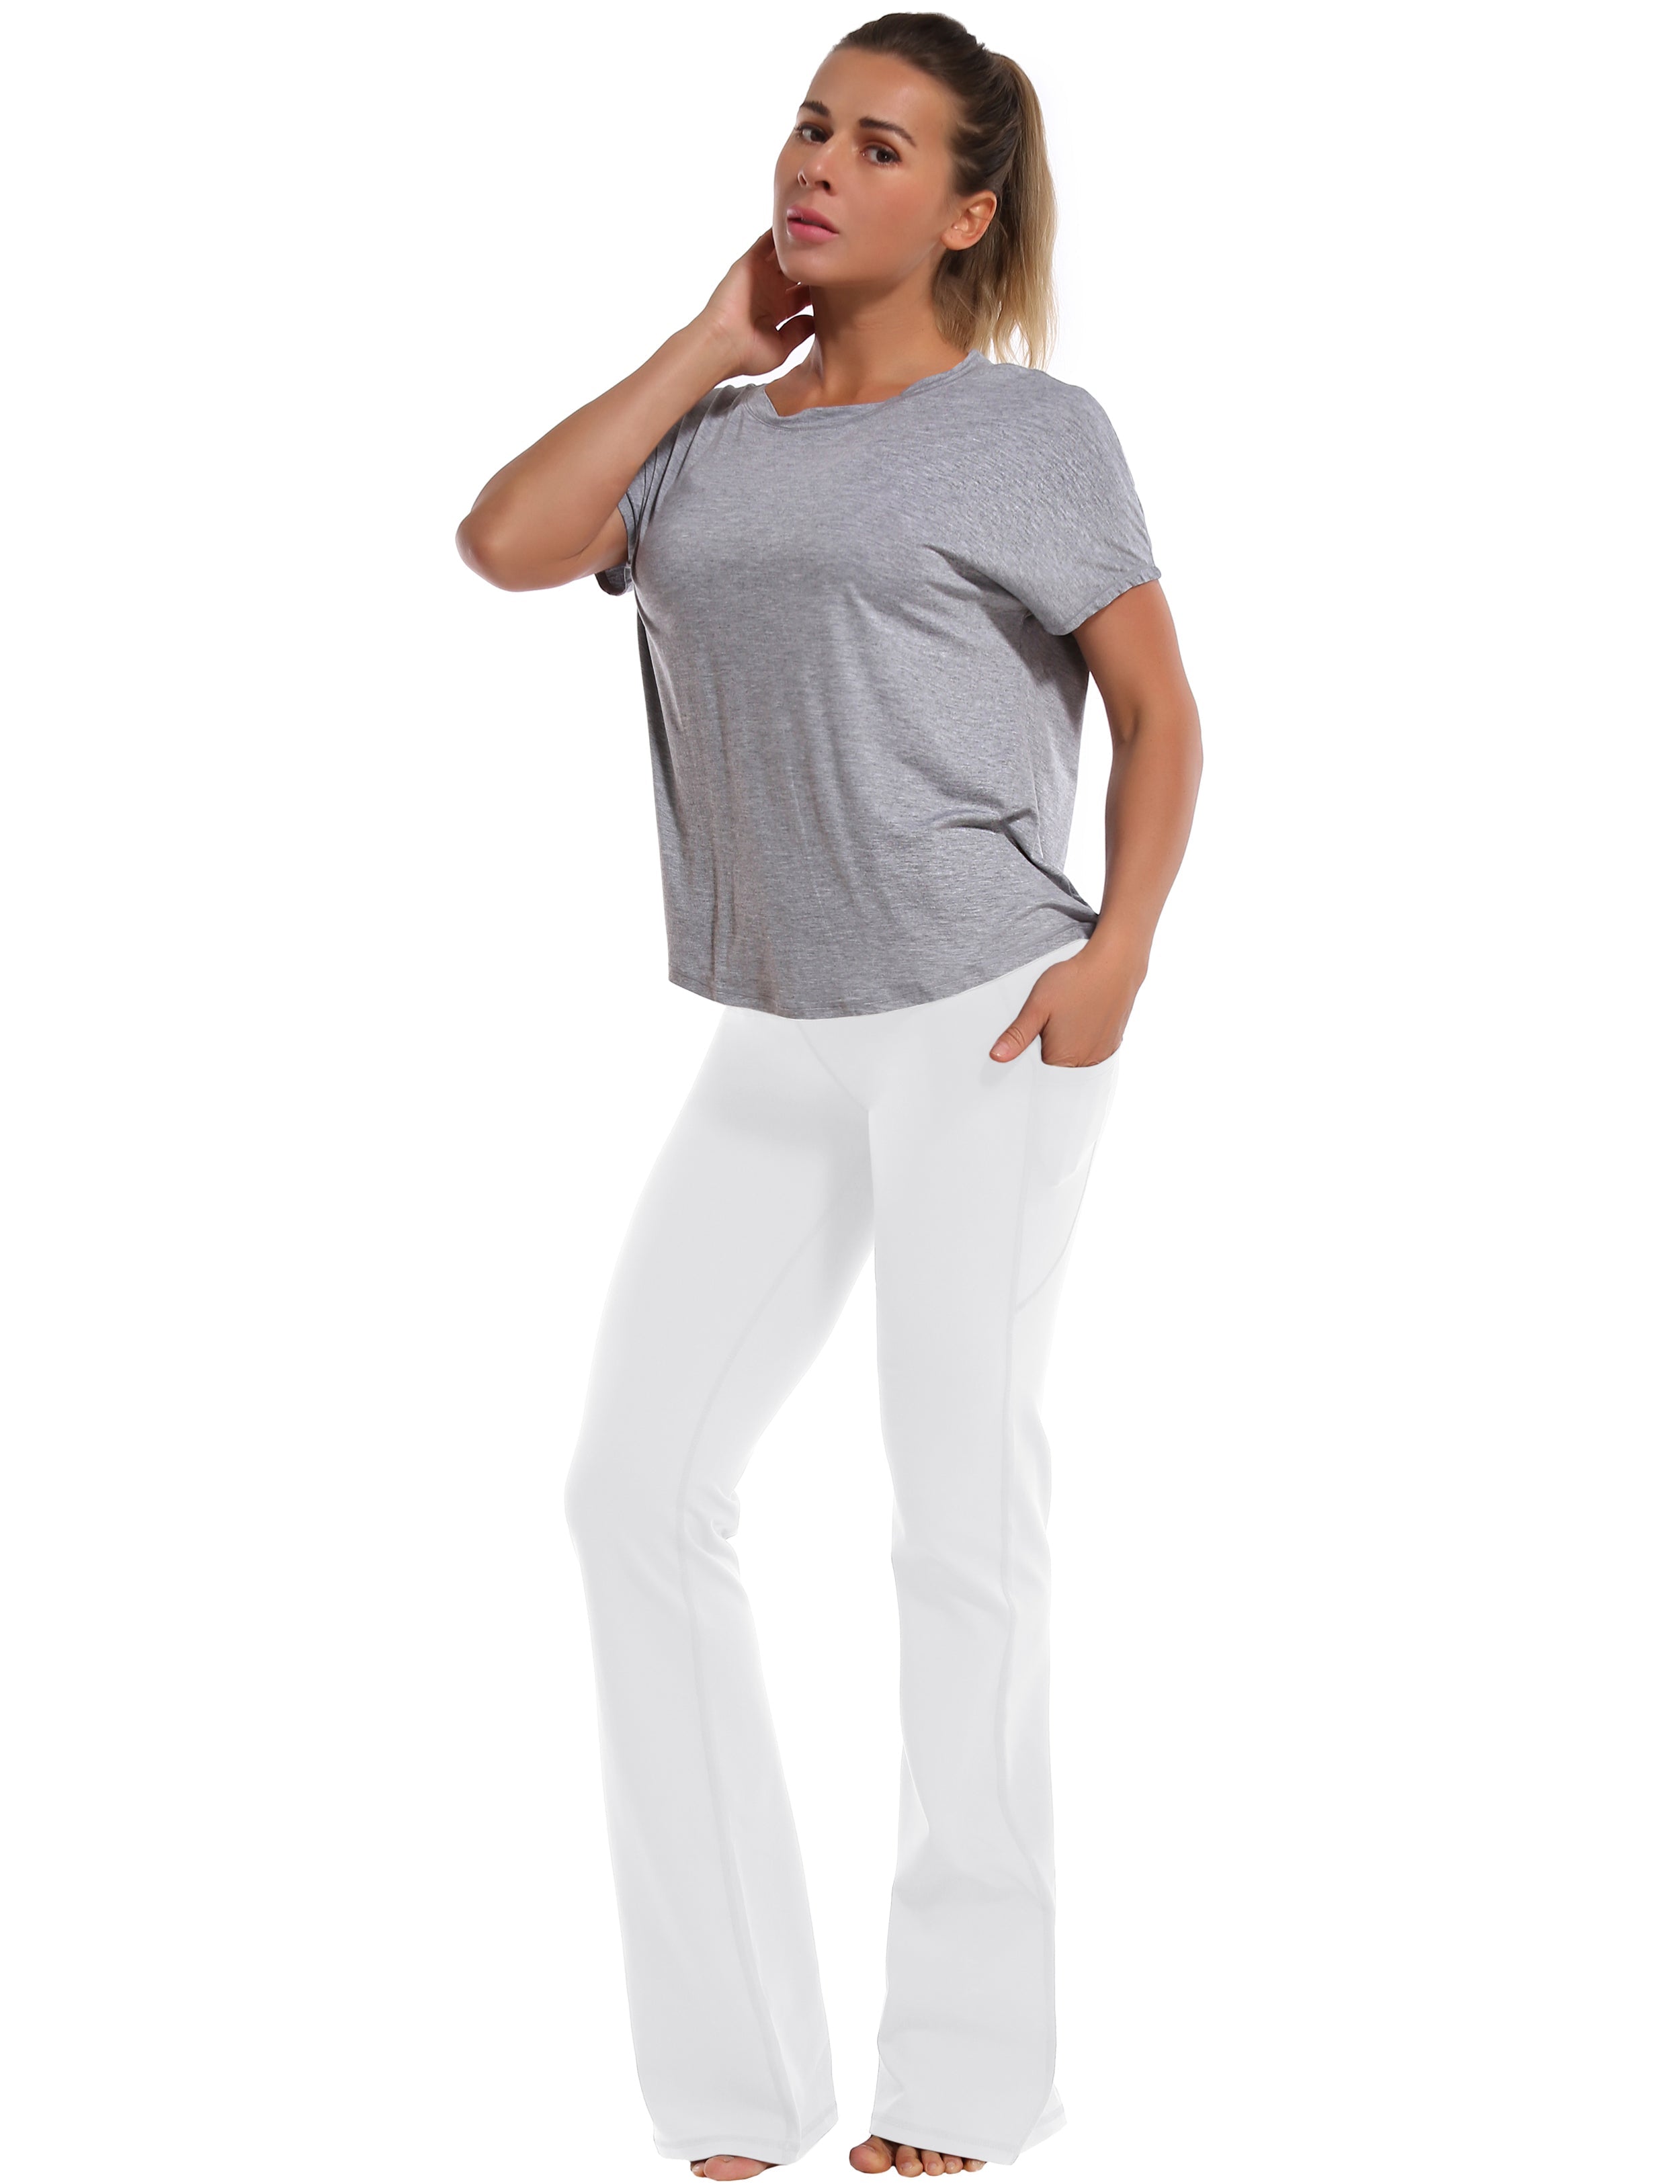 139 Side Pockets Bootcut Leggings white 87%Nylon/13%Spandex Fabric doesn't attract lint easily 4-way stretch No see-through Moisture-wicking Tummy control Inner pocket Four lengths